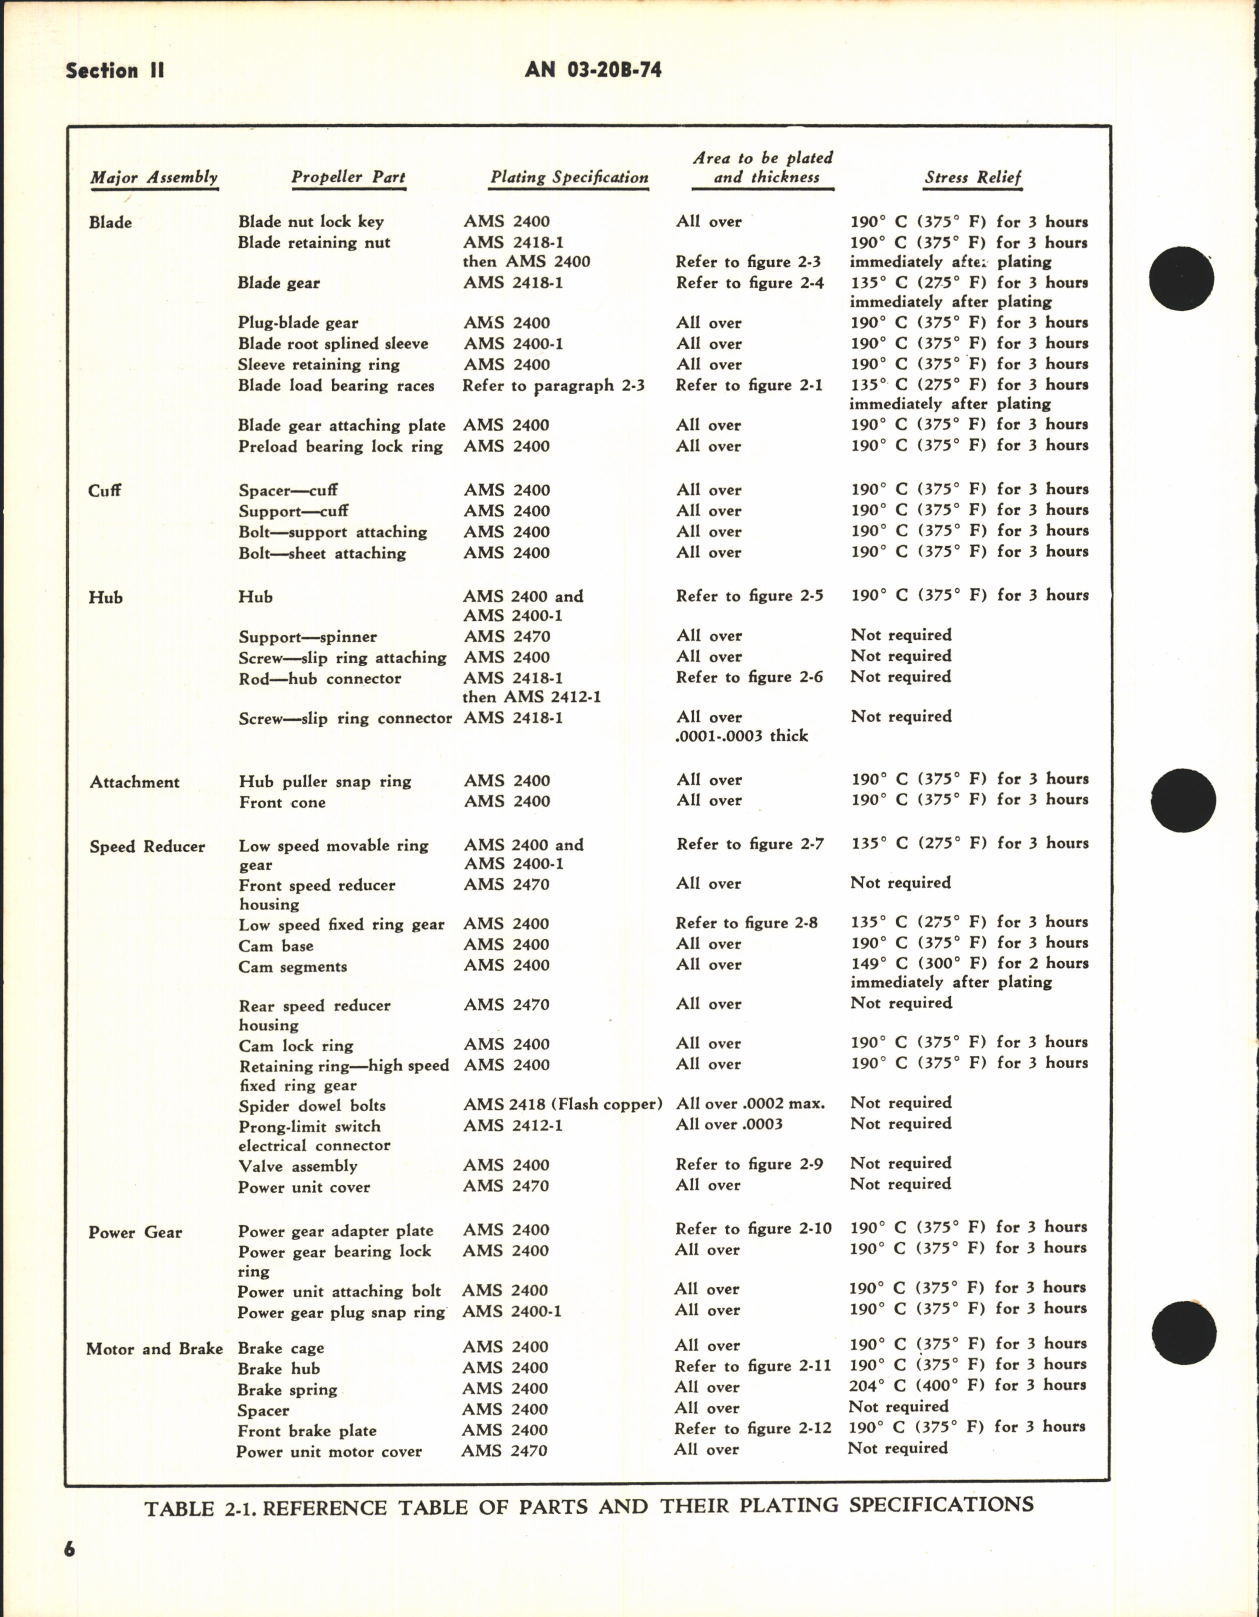 Sample page 8 from AirCorps Library document: Overhaul Instructions Plating and Anodizing Instructions for Electric Propellers